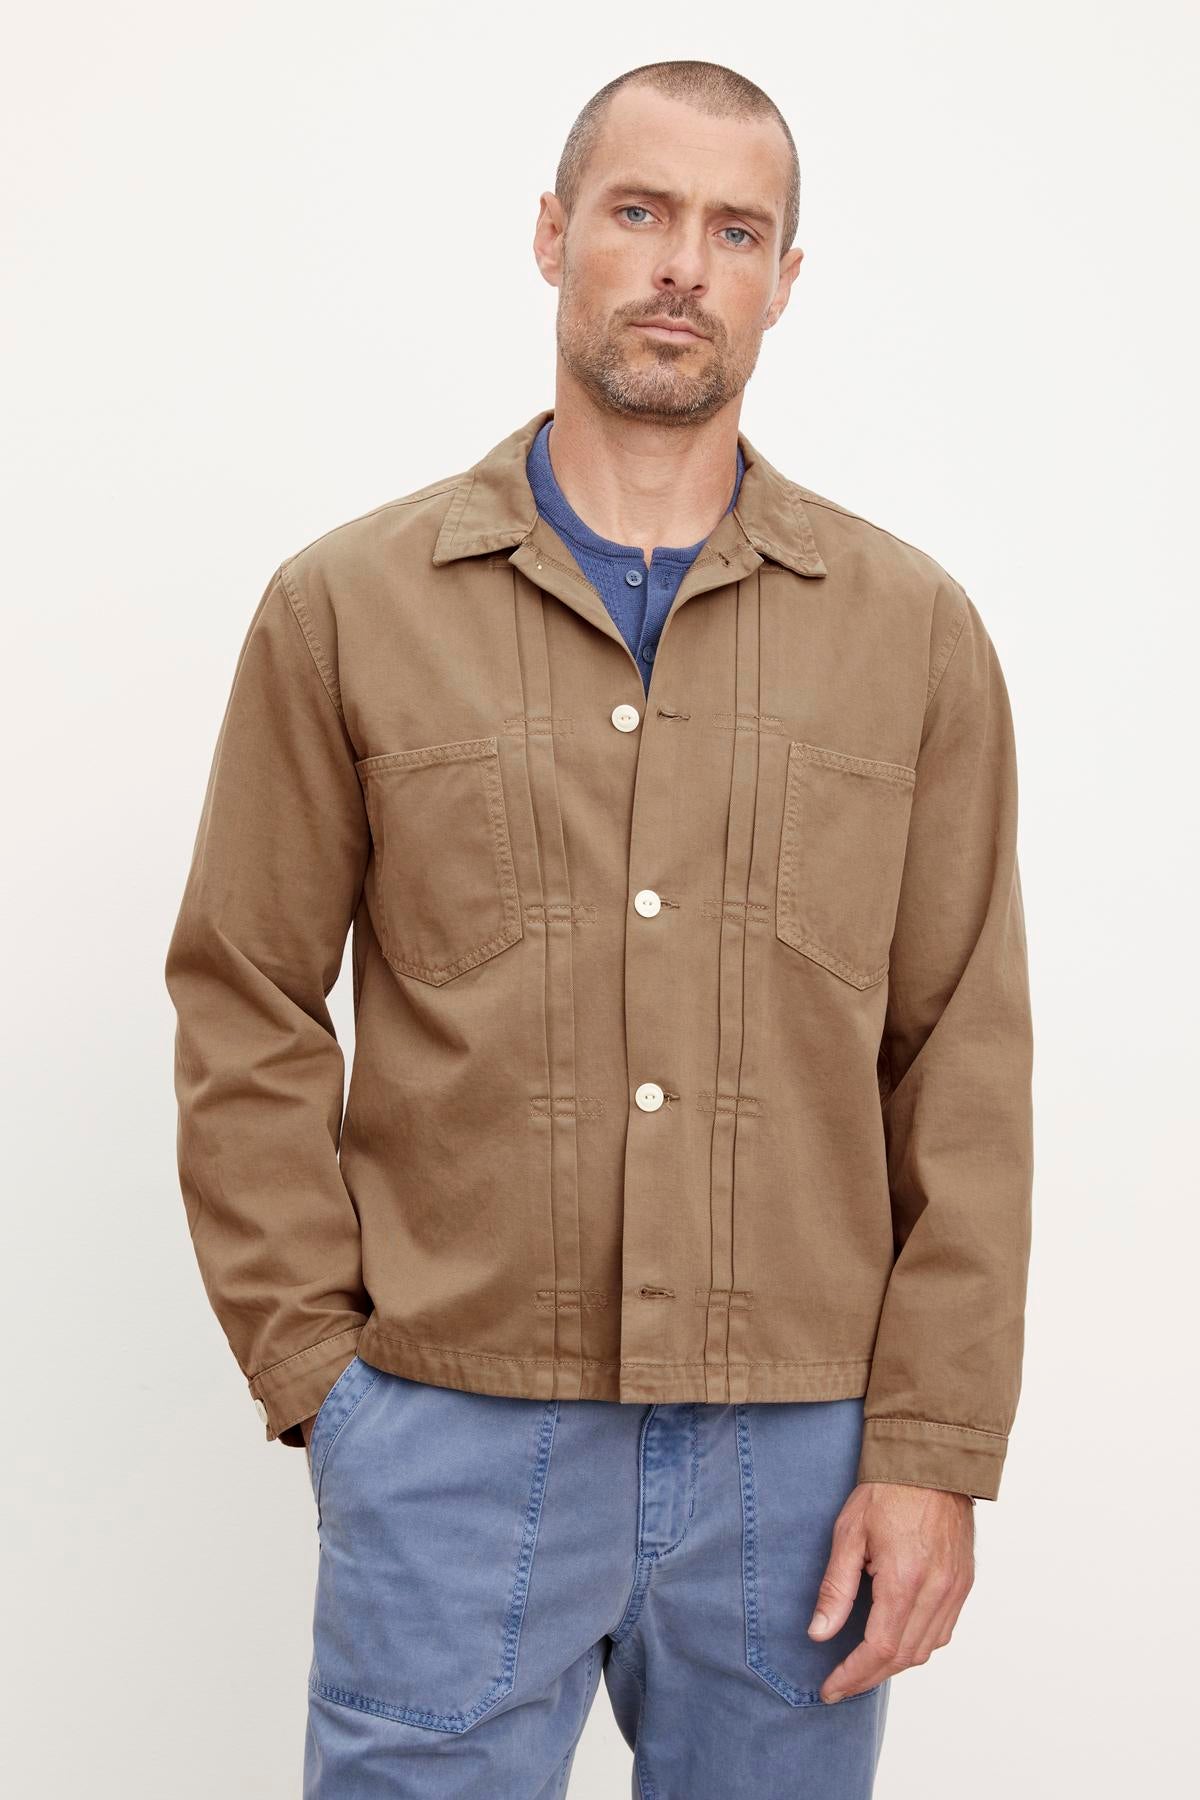 A man in a Velvet by Graham & Spencer FLANNERY SANDED TWILL BUTTON-UP JACKET and blue jeans standing against a plain background, exuding a vintage vibe.-36388077633729